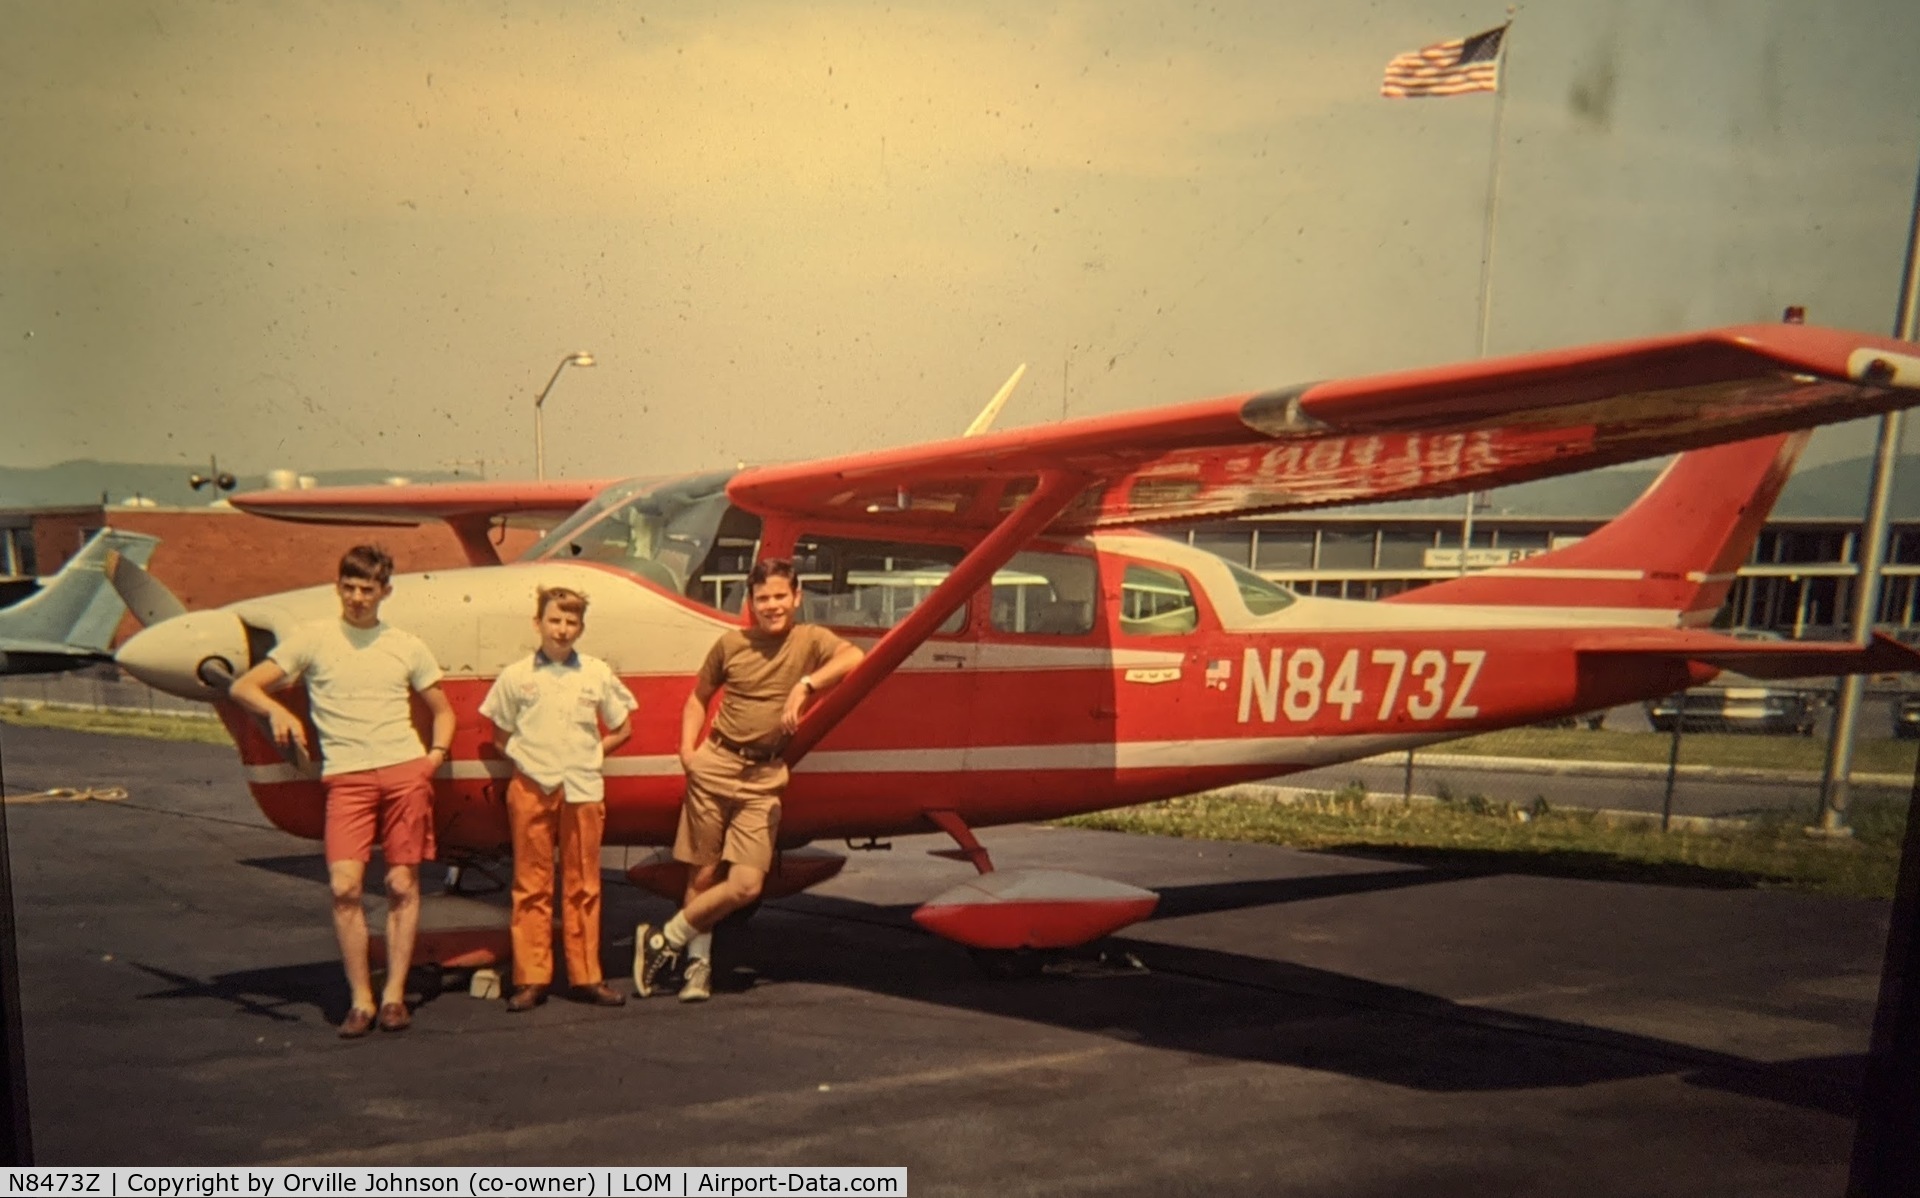 N8473Z, 1963 Cessna 210-5(205) C/N 2050473, Me, my brother and friend posed in front of aircraft in 1969